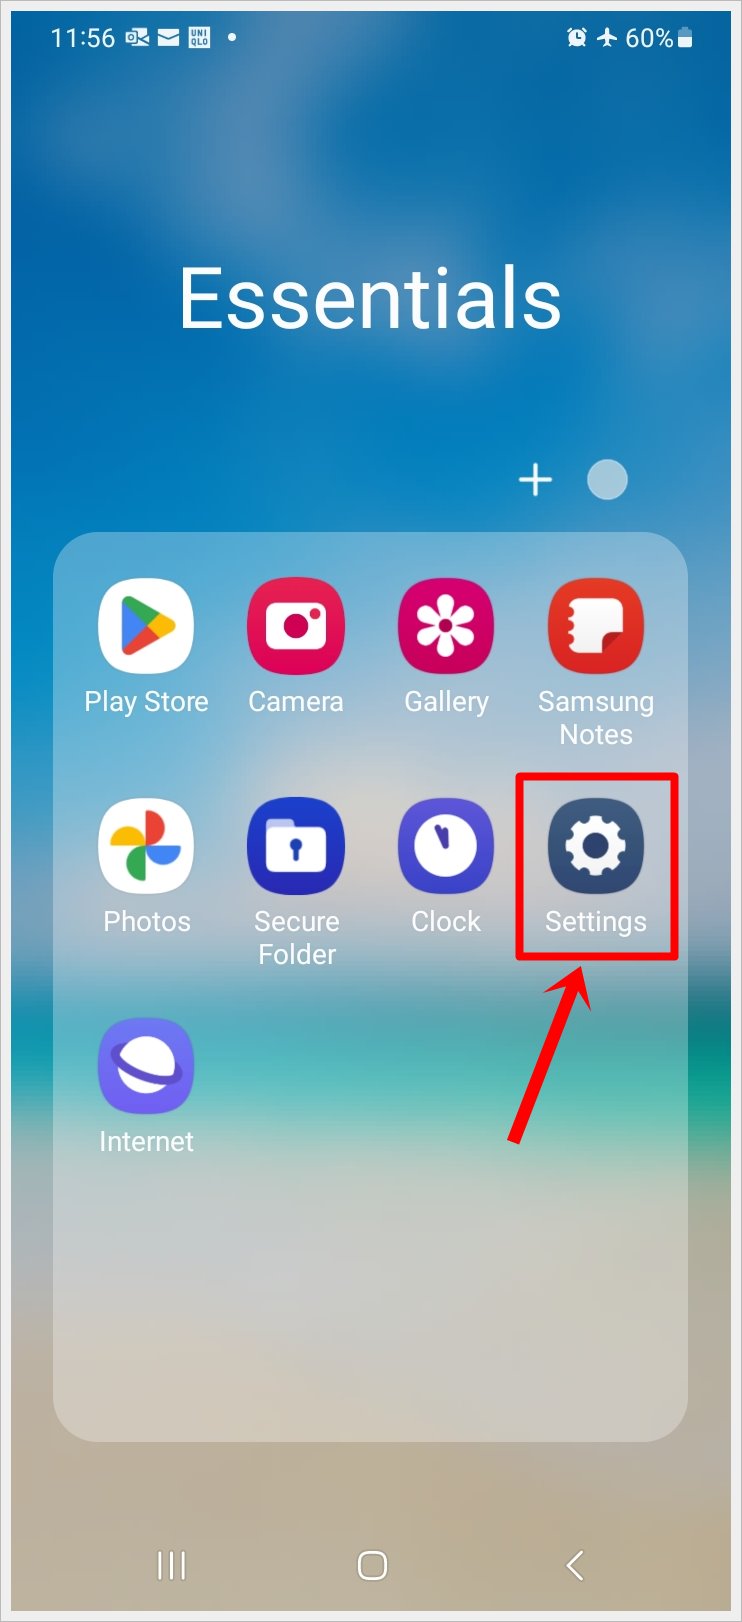 This image displays a screenshot of an Android phone, with the Settings app, also known as the gear icon, highlighted.